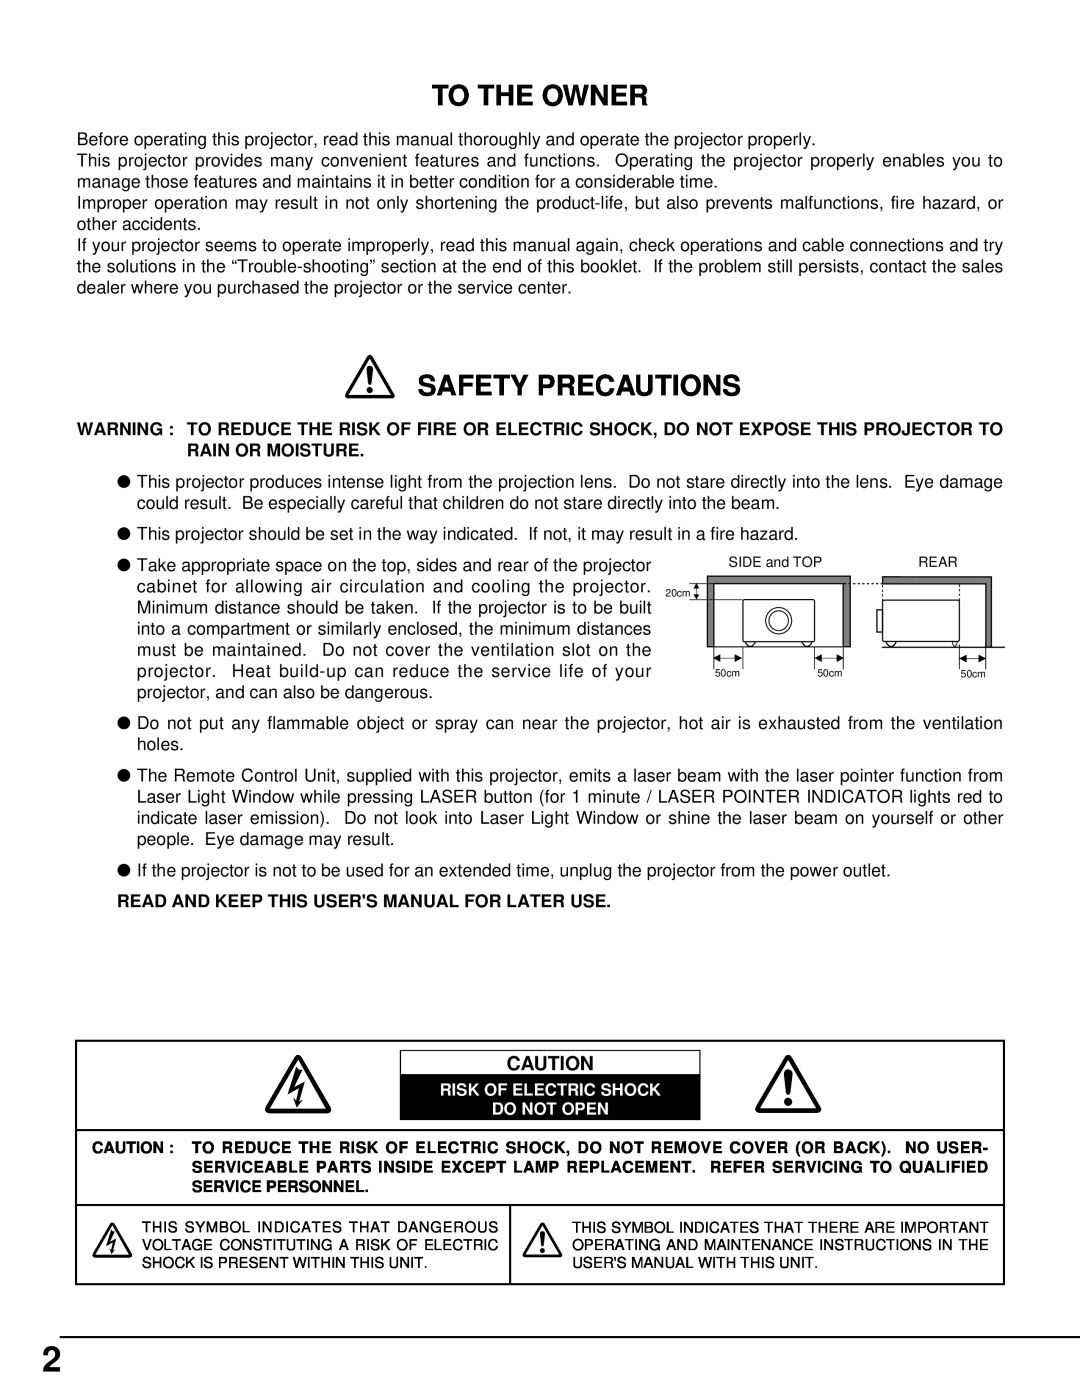 Christie Digital Systems 38-VIV205-01 To The Owner, Safety Precautions, Read And Keep This Users Manual For Later Use 